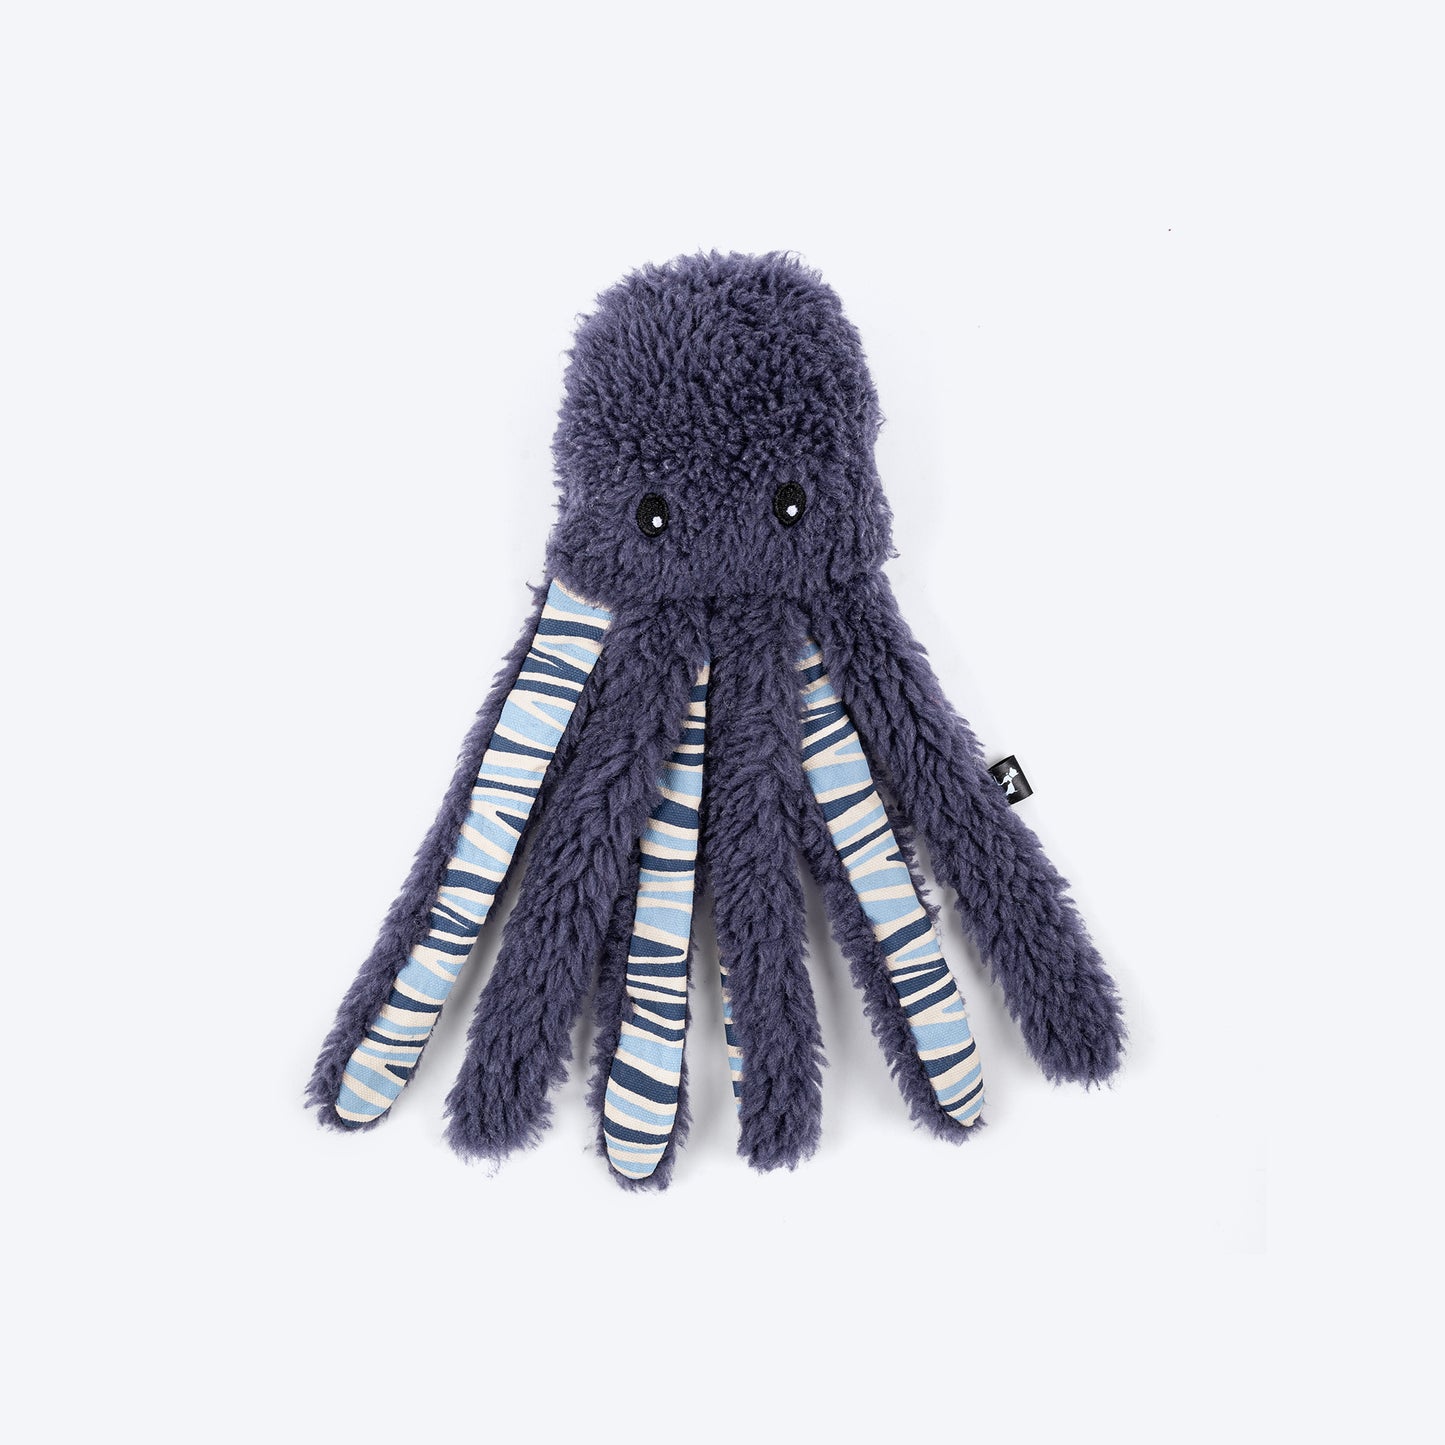 HUFT Plushtopus Squeaky Fur Toy For Dogs - Heads Up For Tails